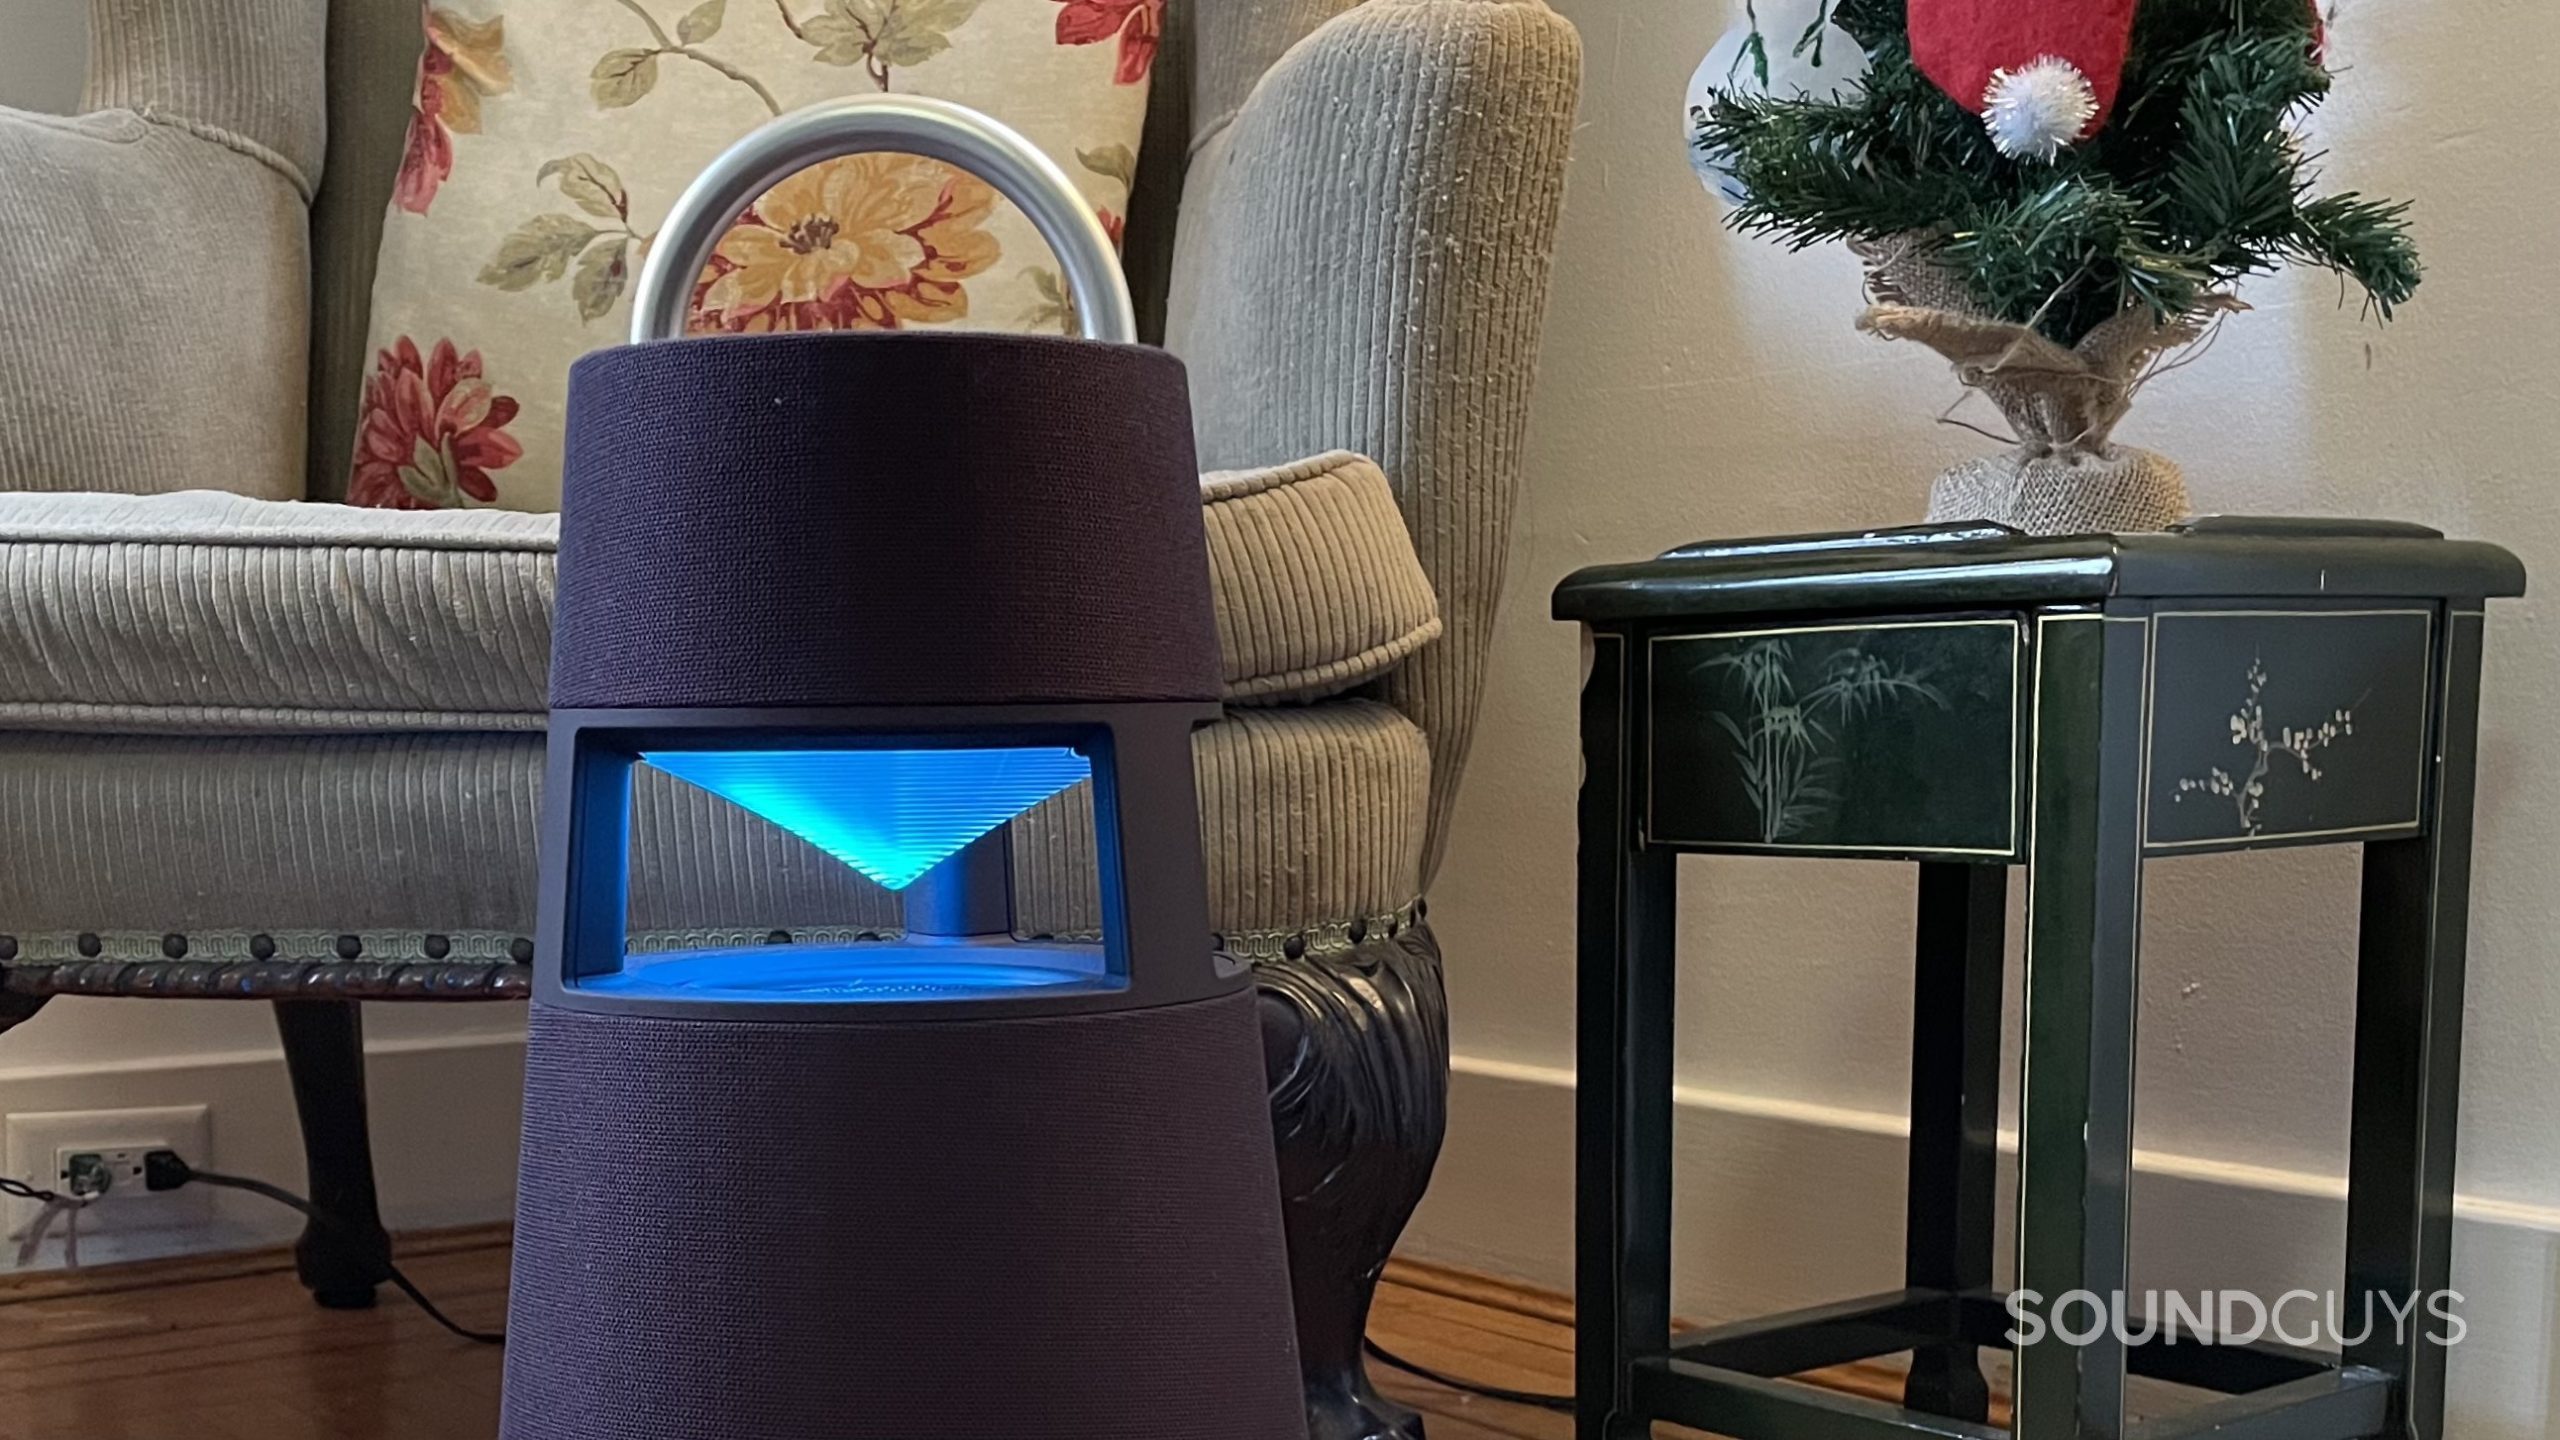 LG XBOOM 360 with an armchair, side table, and small Christmas tree in the background.